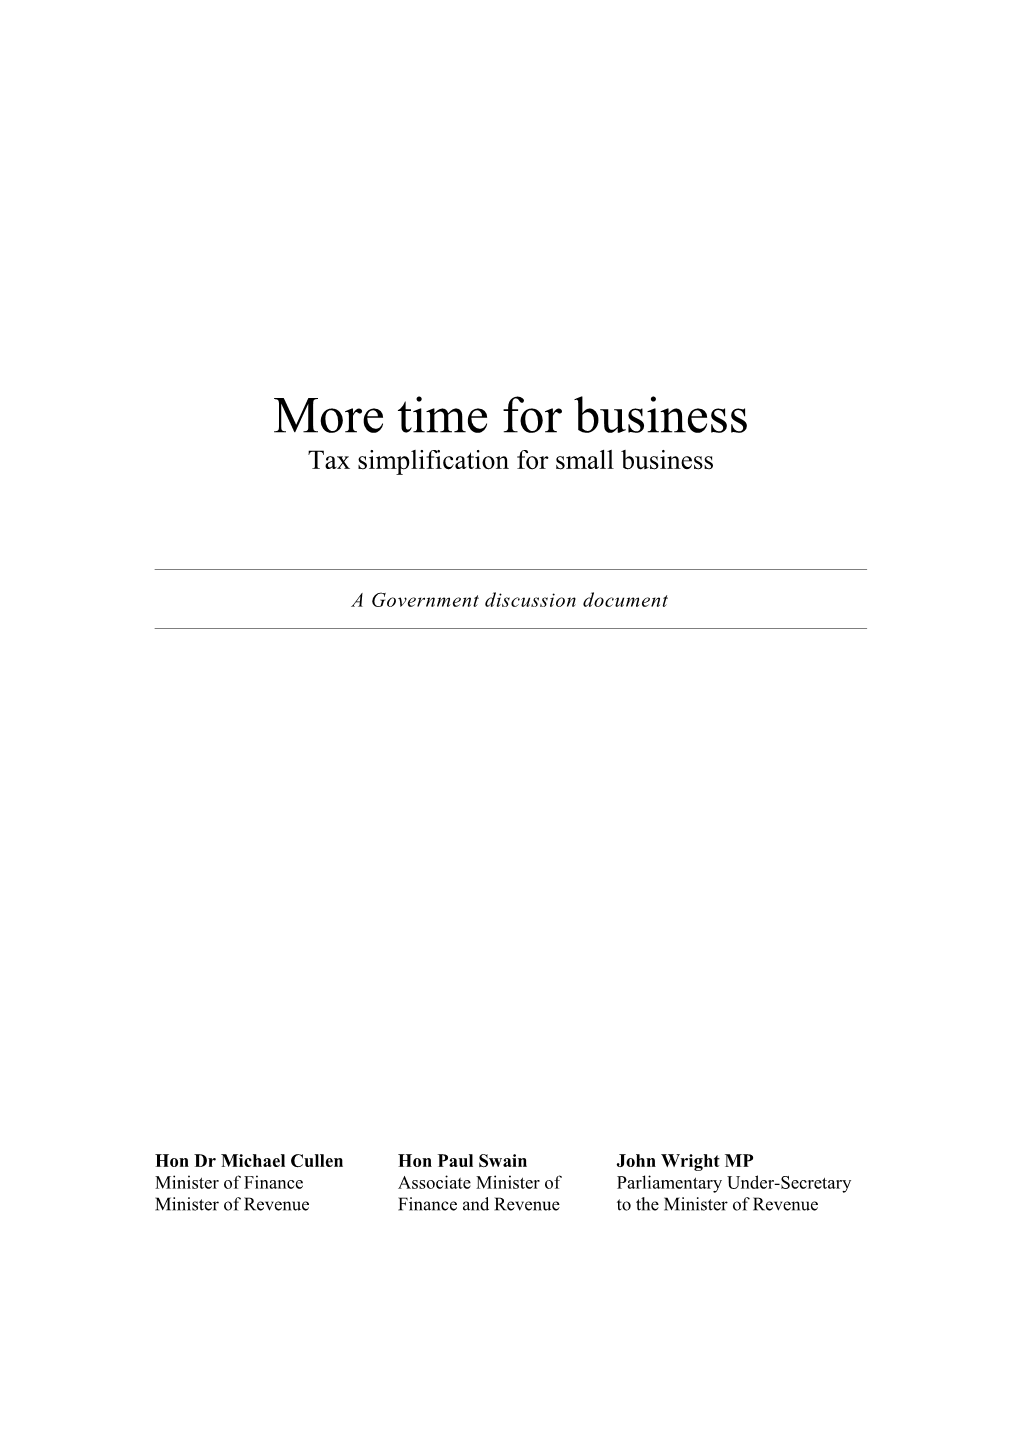 More Time for Business - Tax Simplification for Small Business